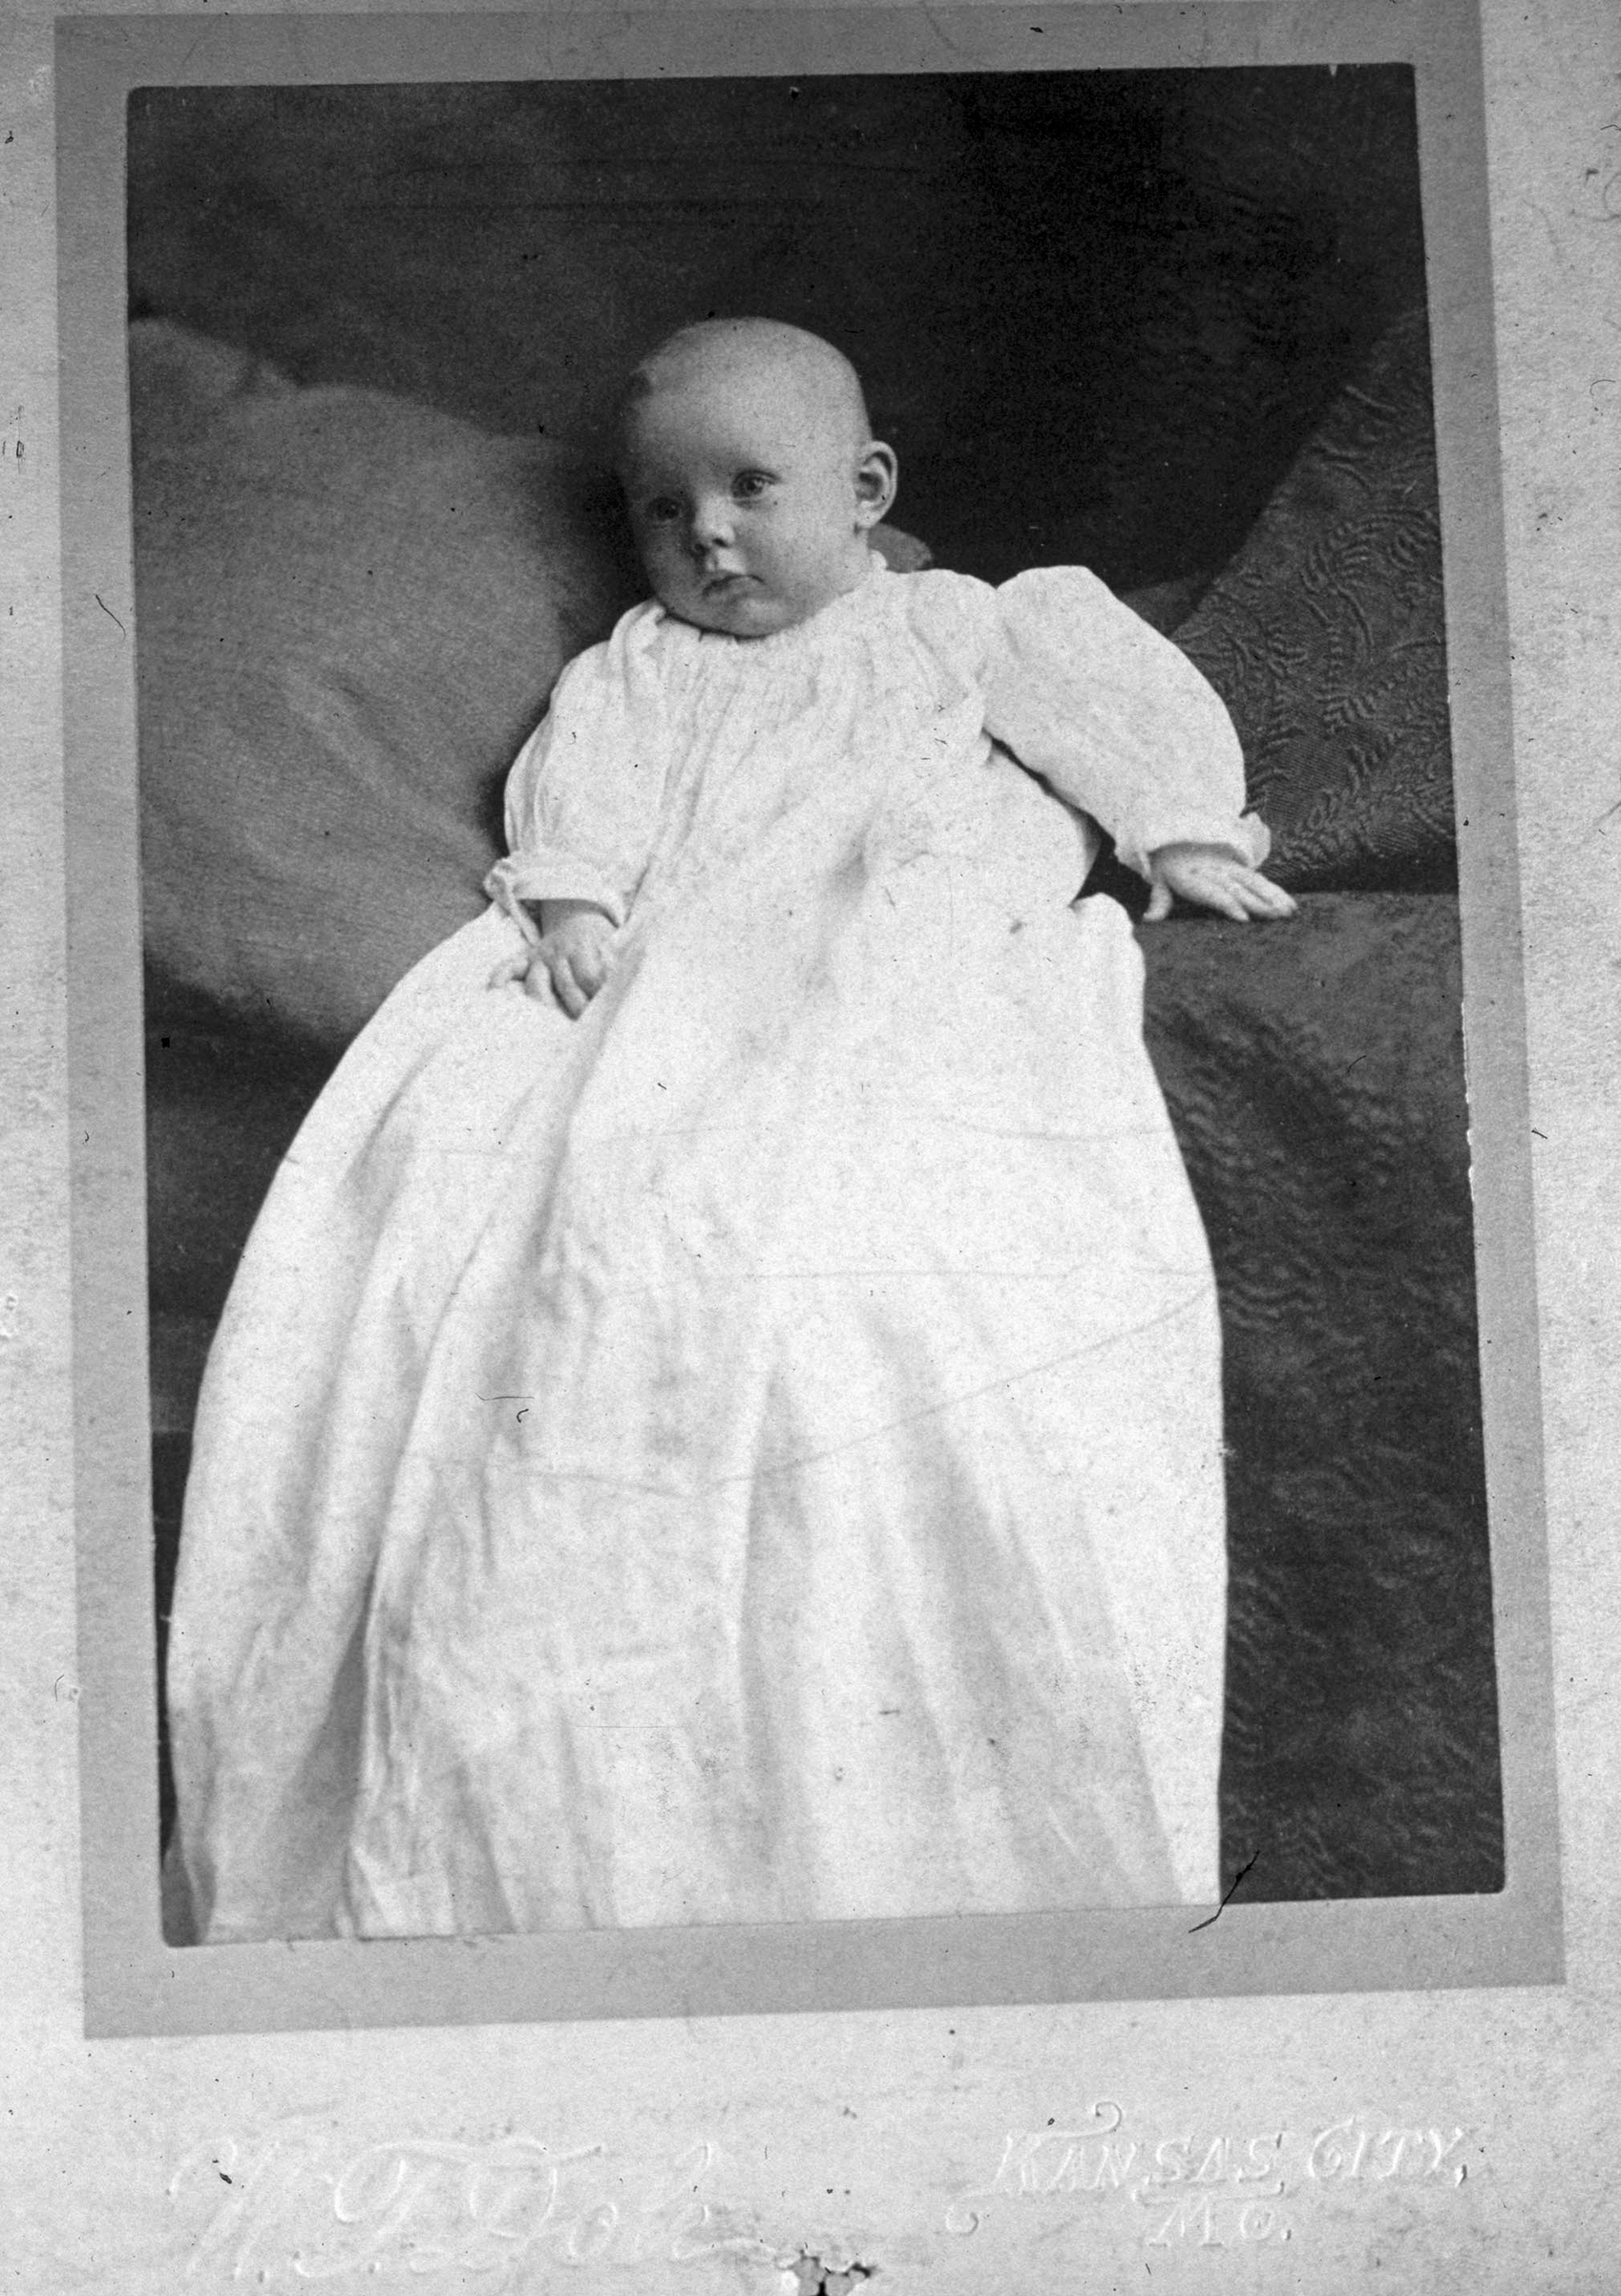 Baby picture of pilot Amelia Earhart, Indianapolis, Ind. 1897.